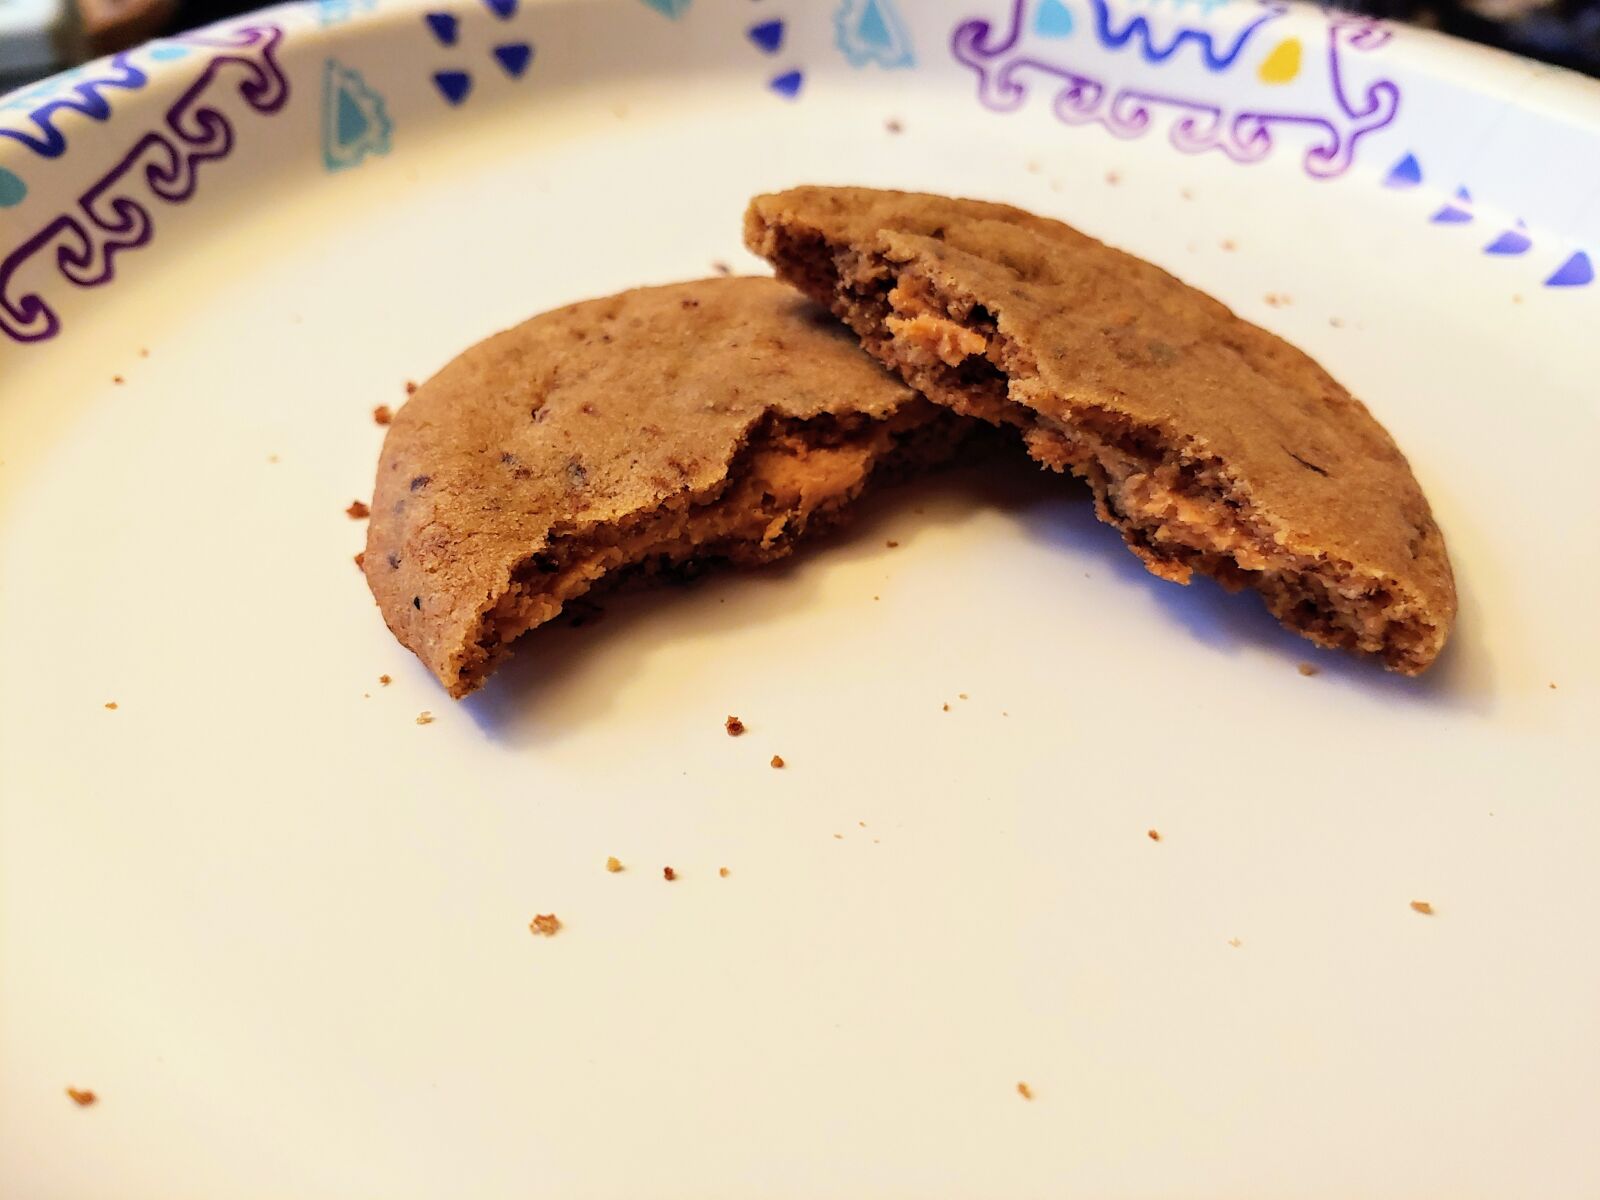 LG LM-V405 sample photo. Cookie, peanut butter, homemade photography